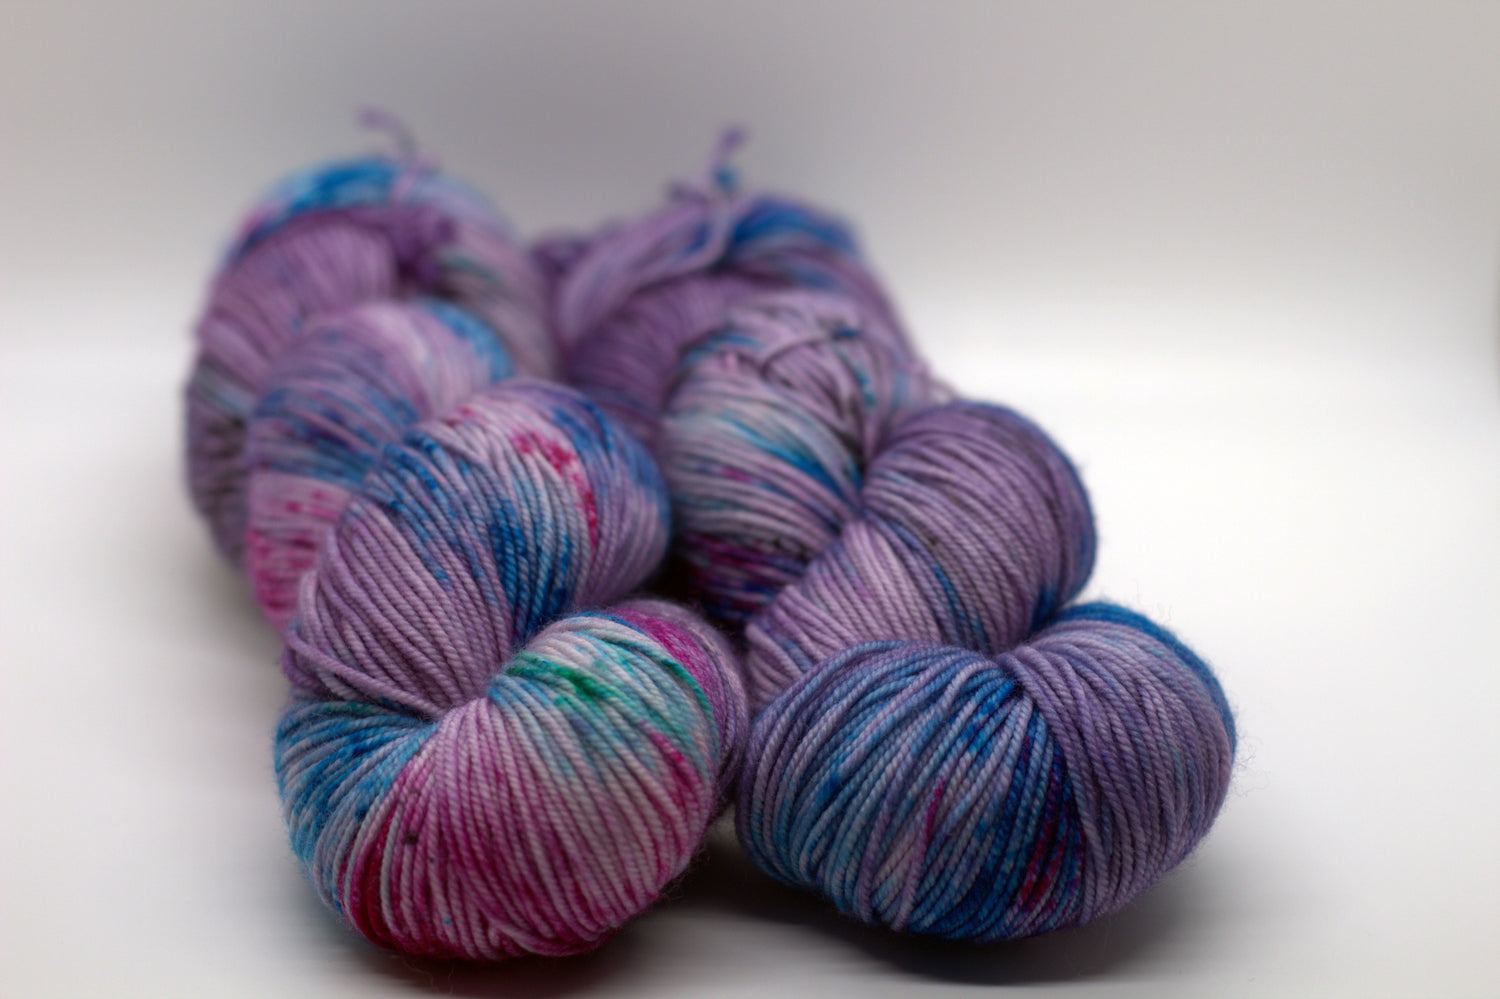 Two twisted skeins of light purple yarn with turquoise, magenta and black speckles on white background.